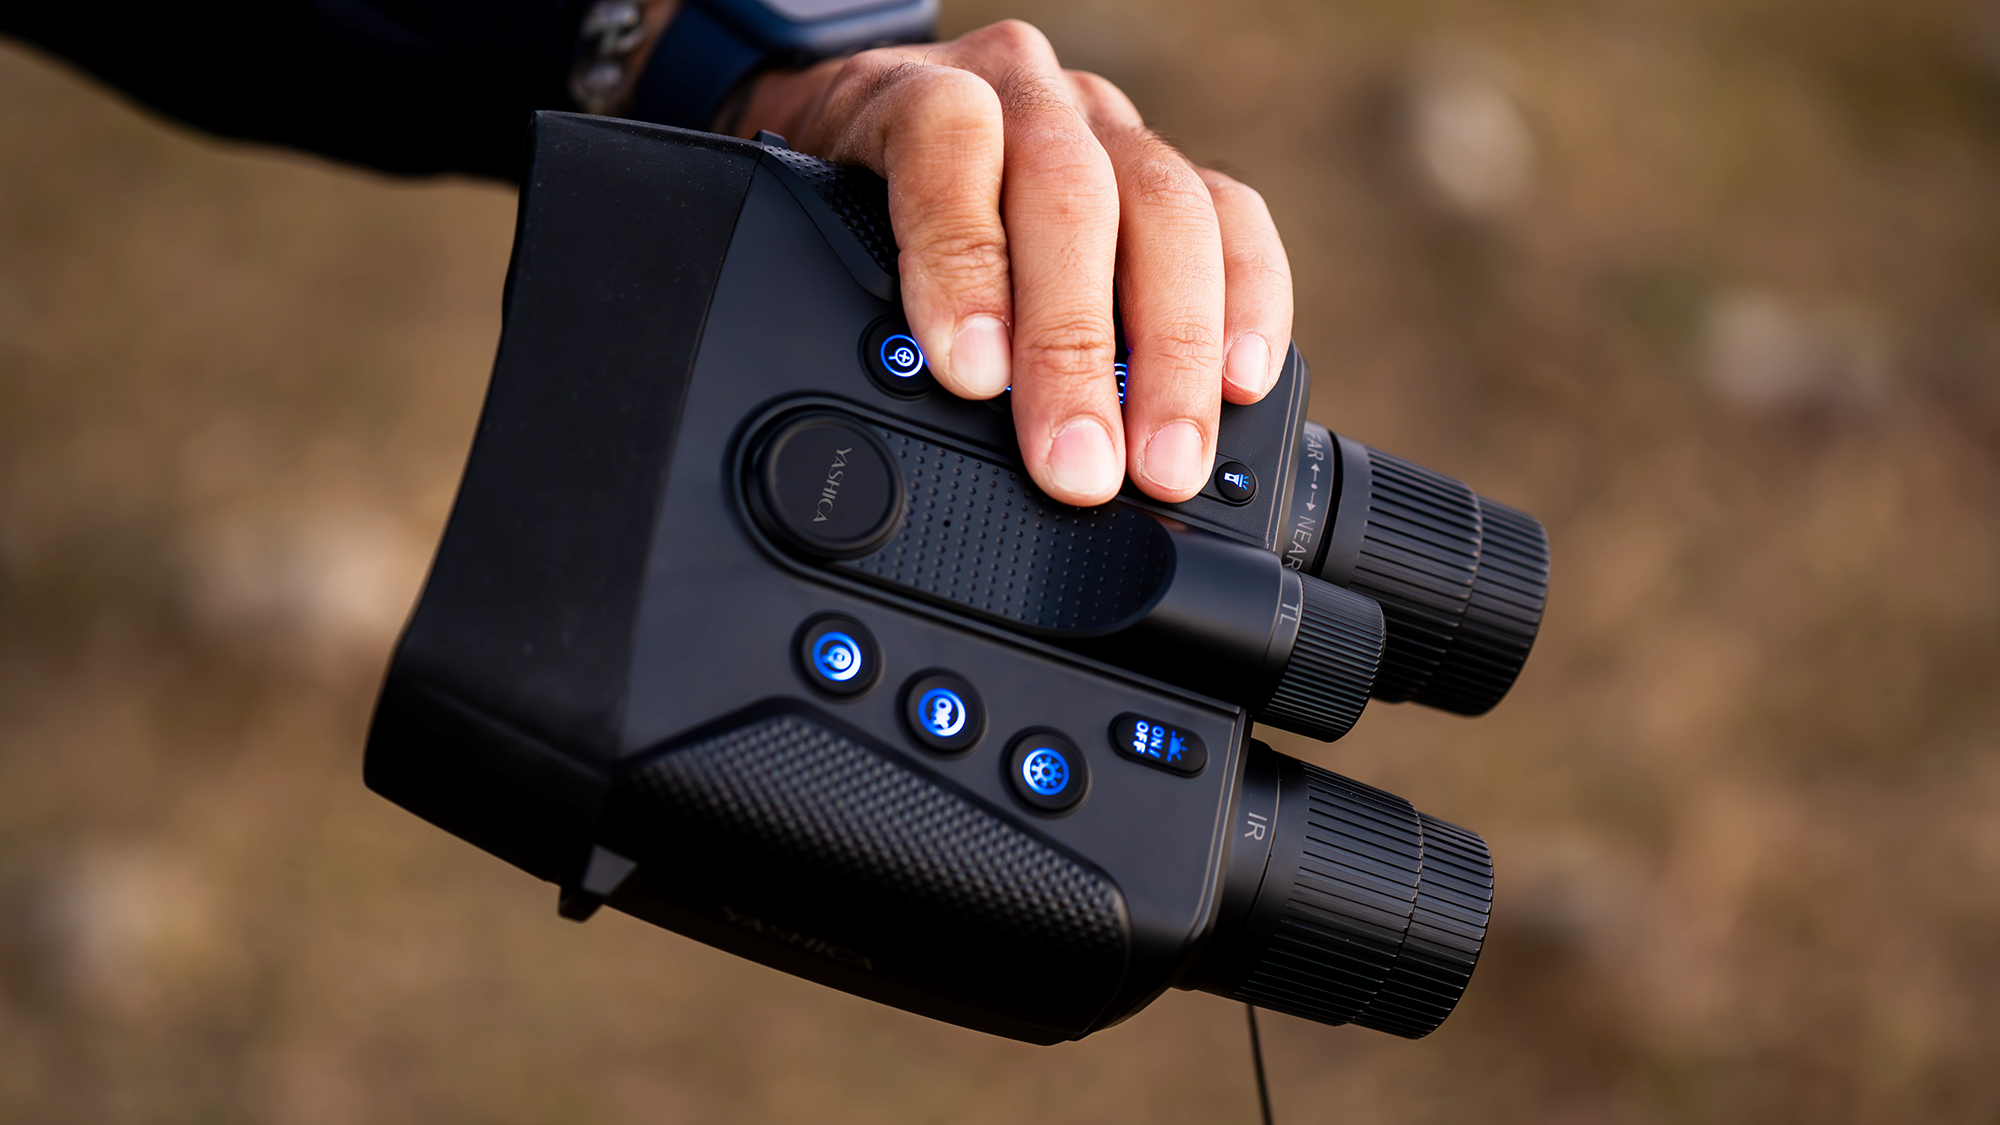 Hold Yashica Night Vision 4K binoculars in your hand, the button lights up